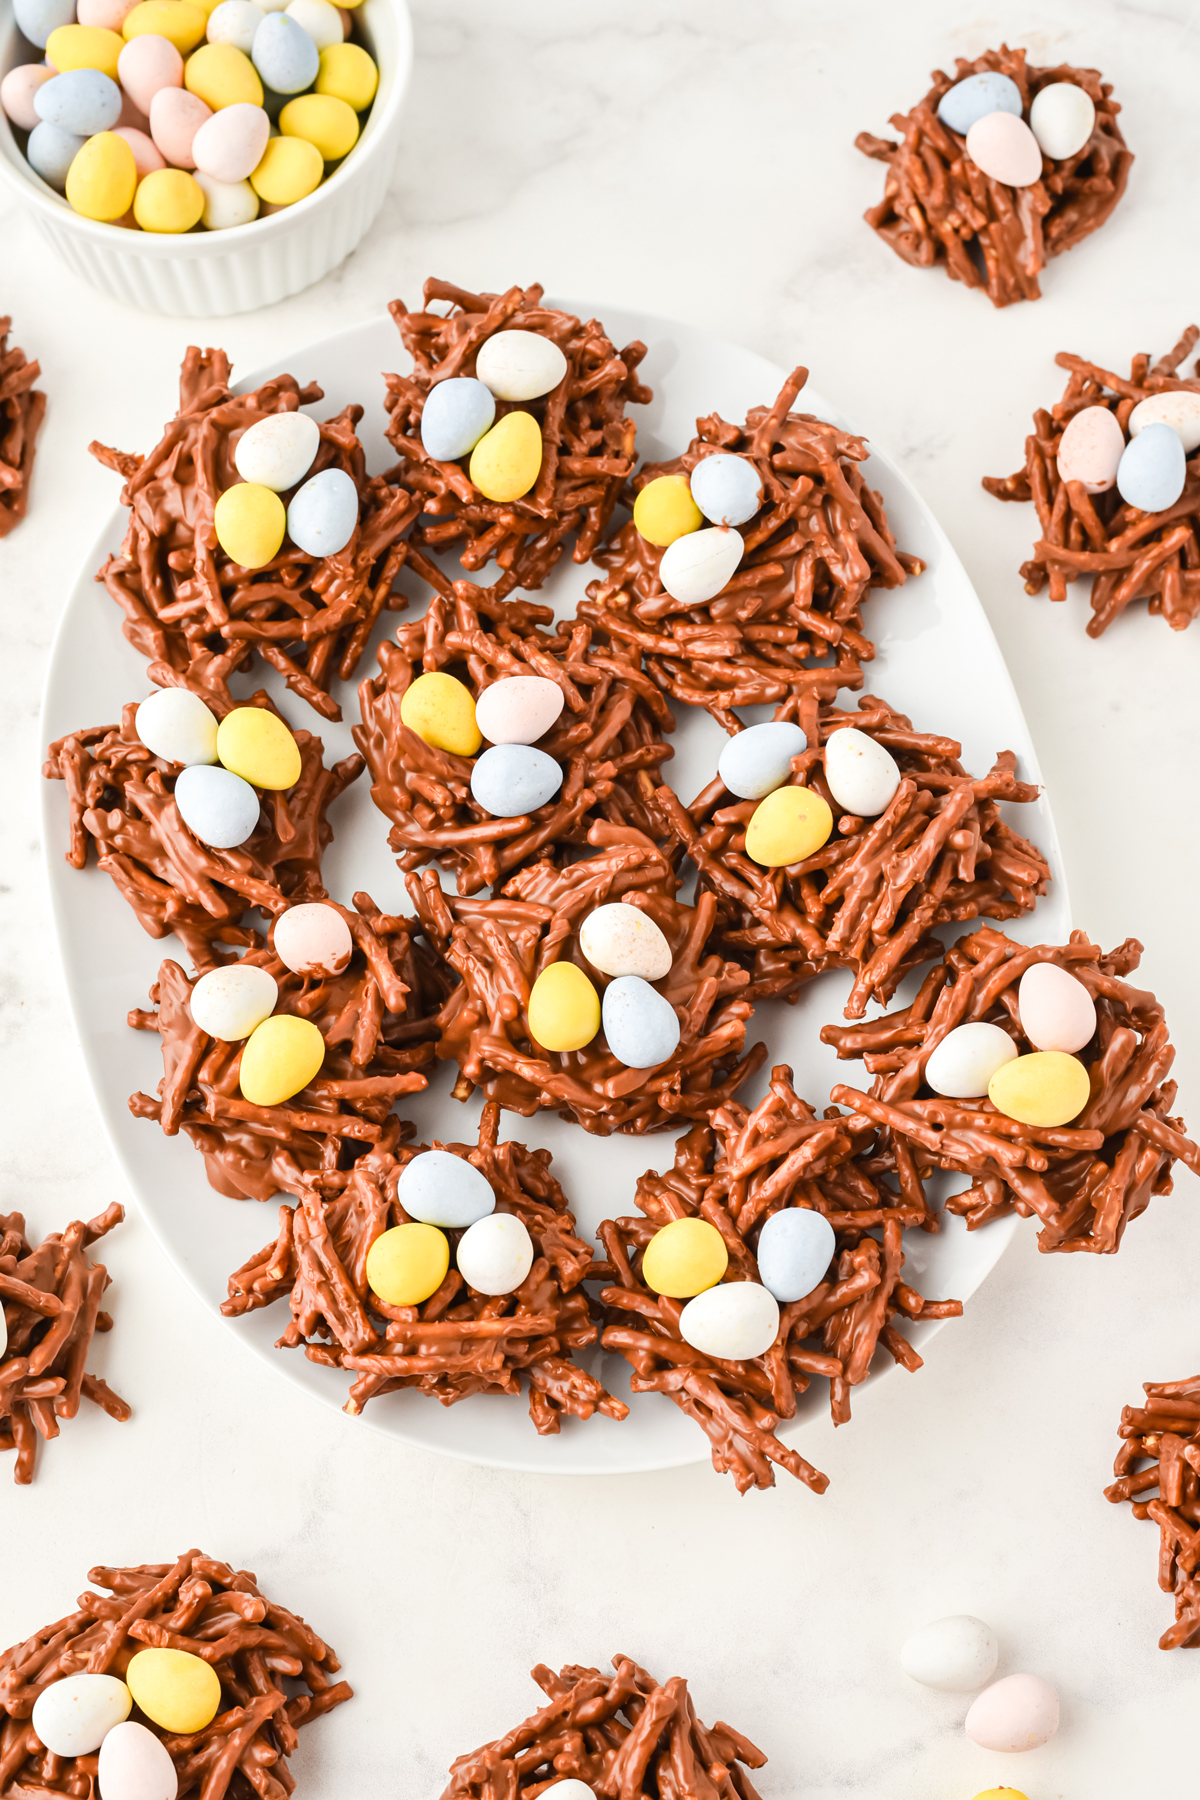 A plate of bird's nest cookies. Some are scattered on a white counter